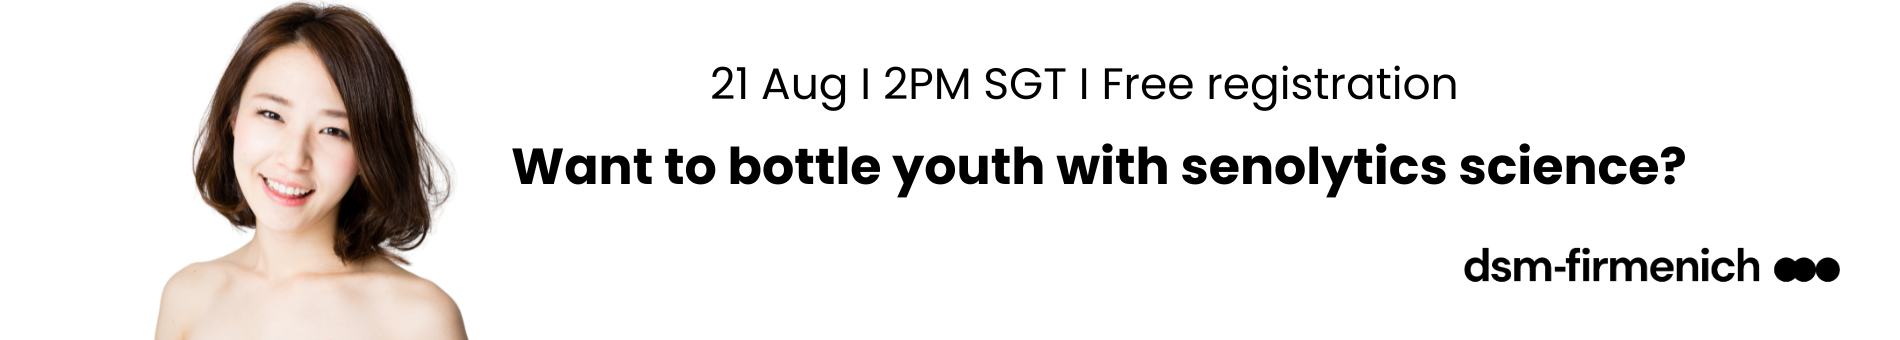 Want to bottle youth with senolytics science?